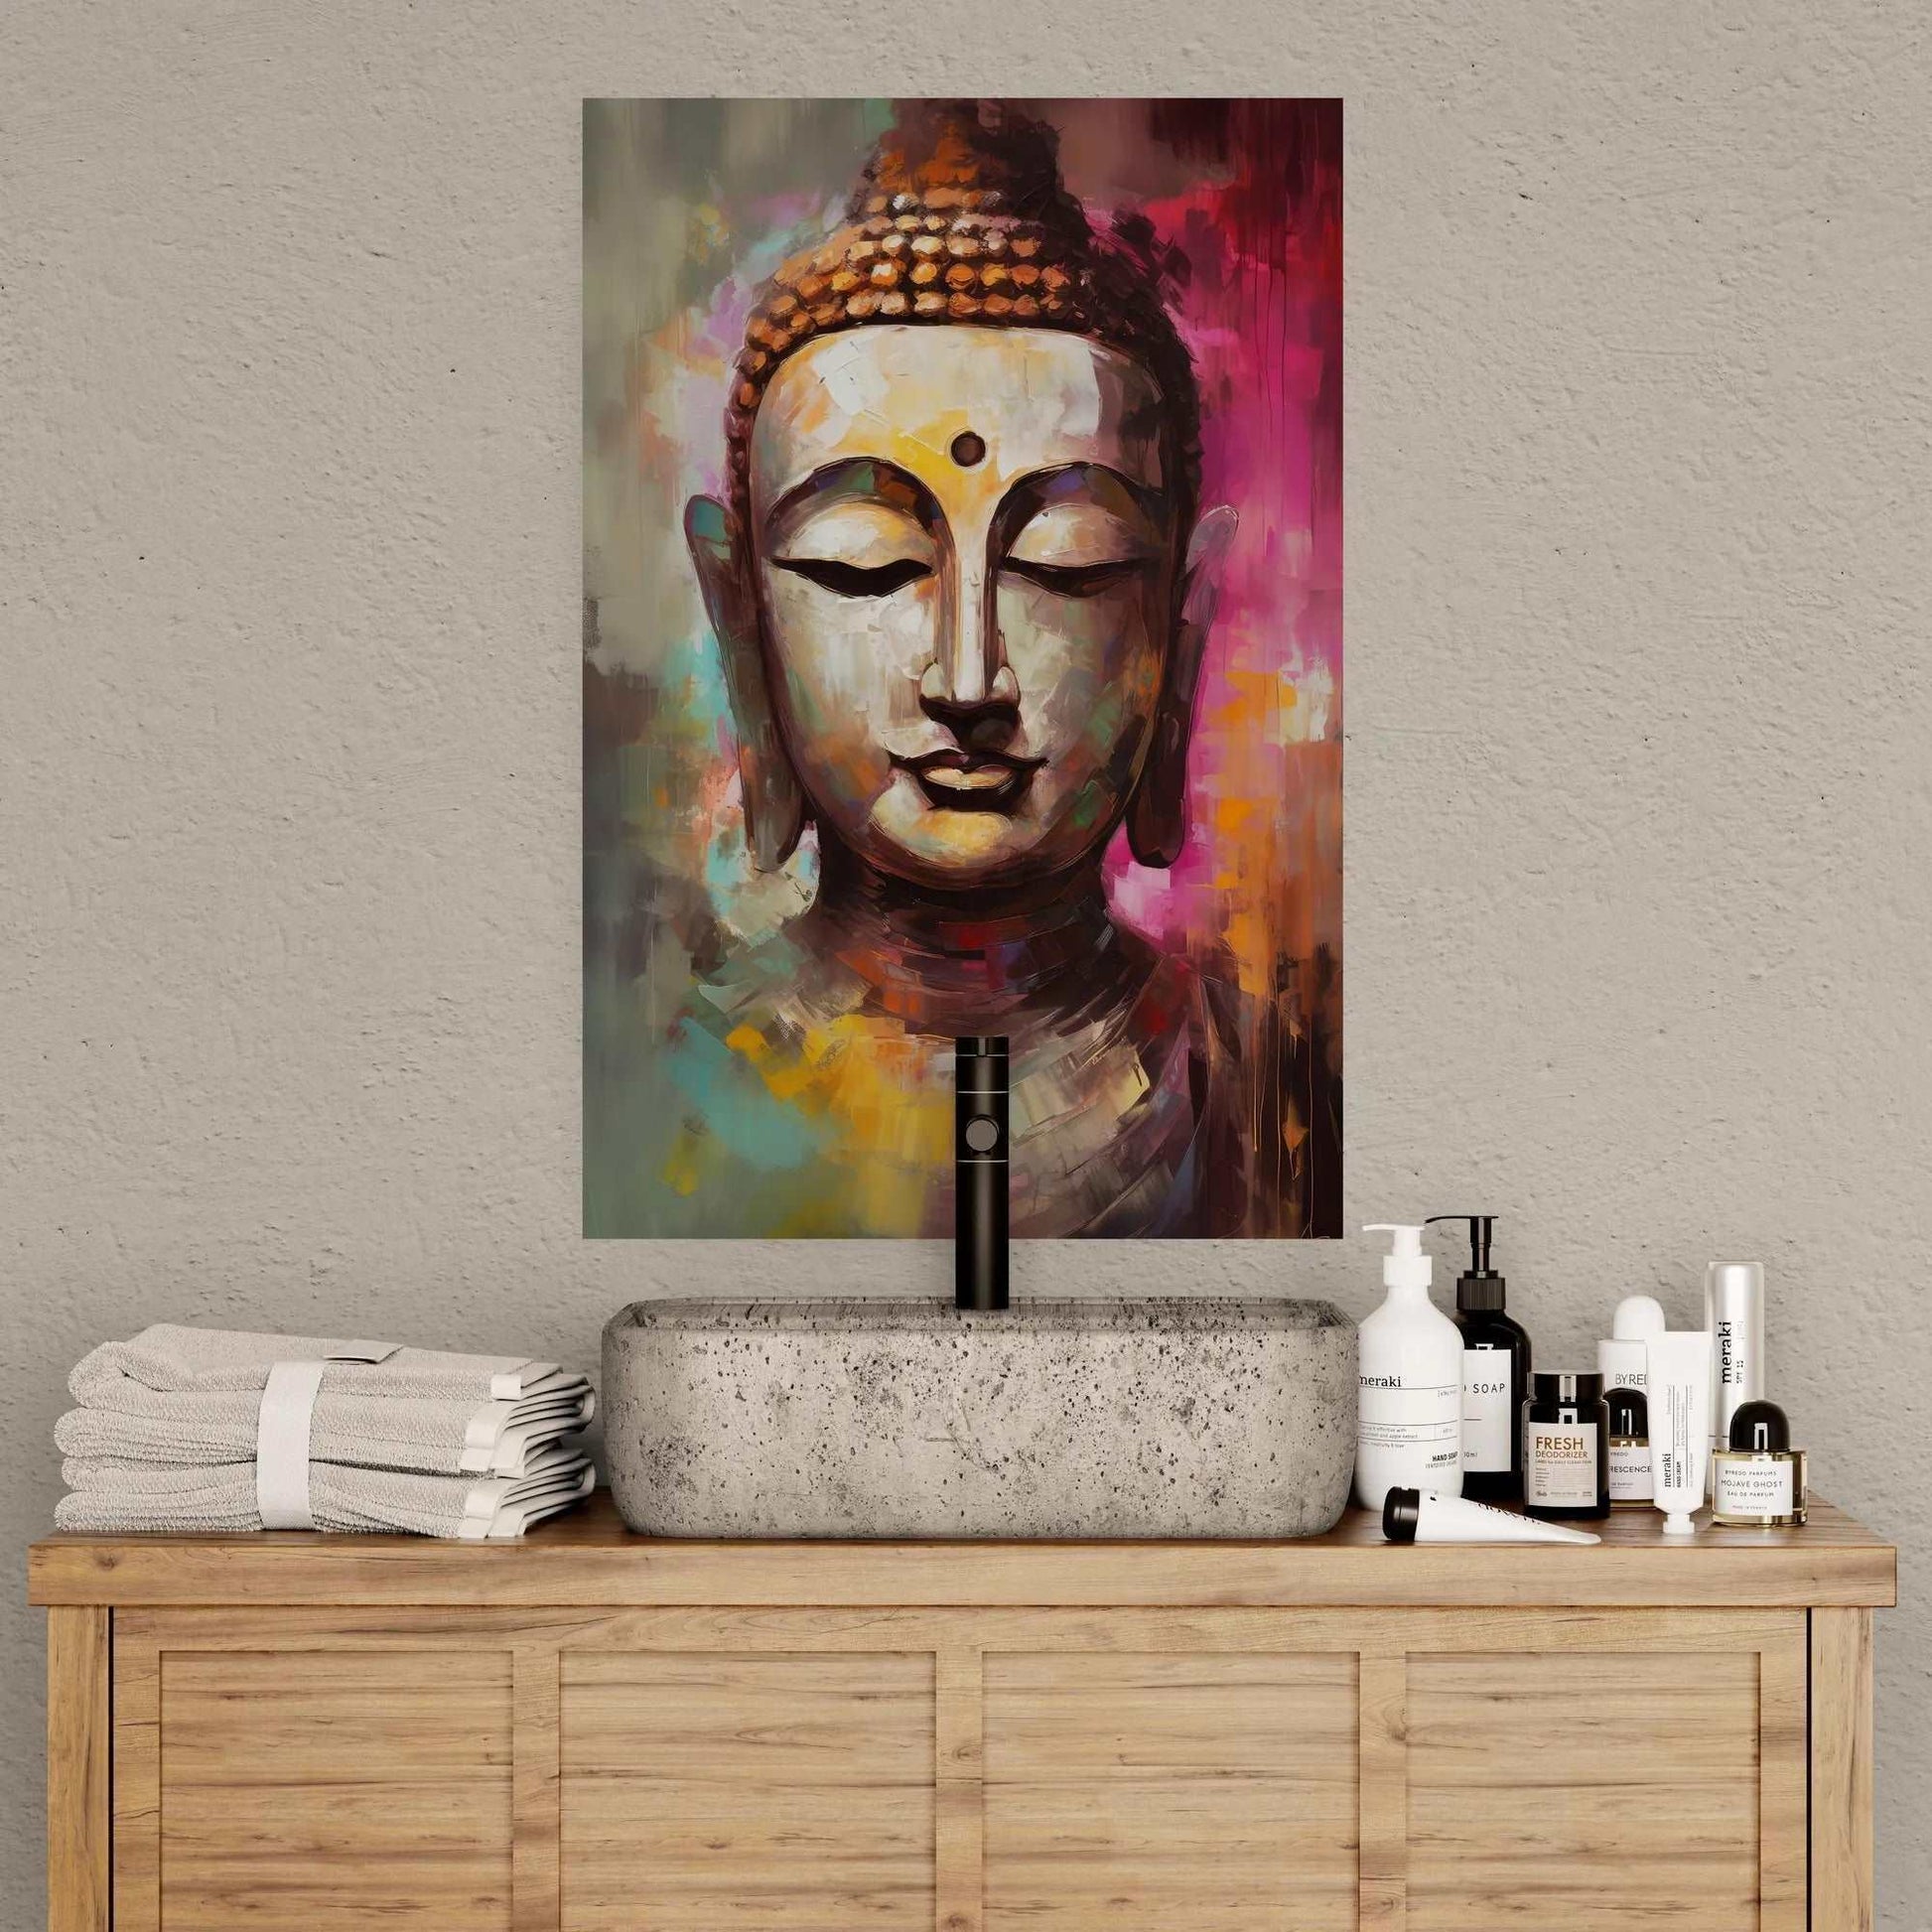 A colorful abstract painting of Buddha's face over a sink with towels and skincare products on a wooden cabinet.